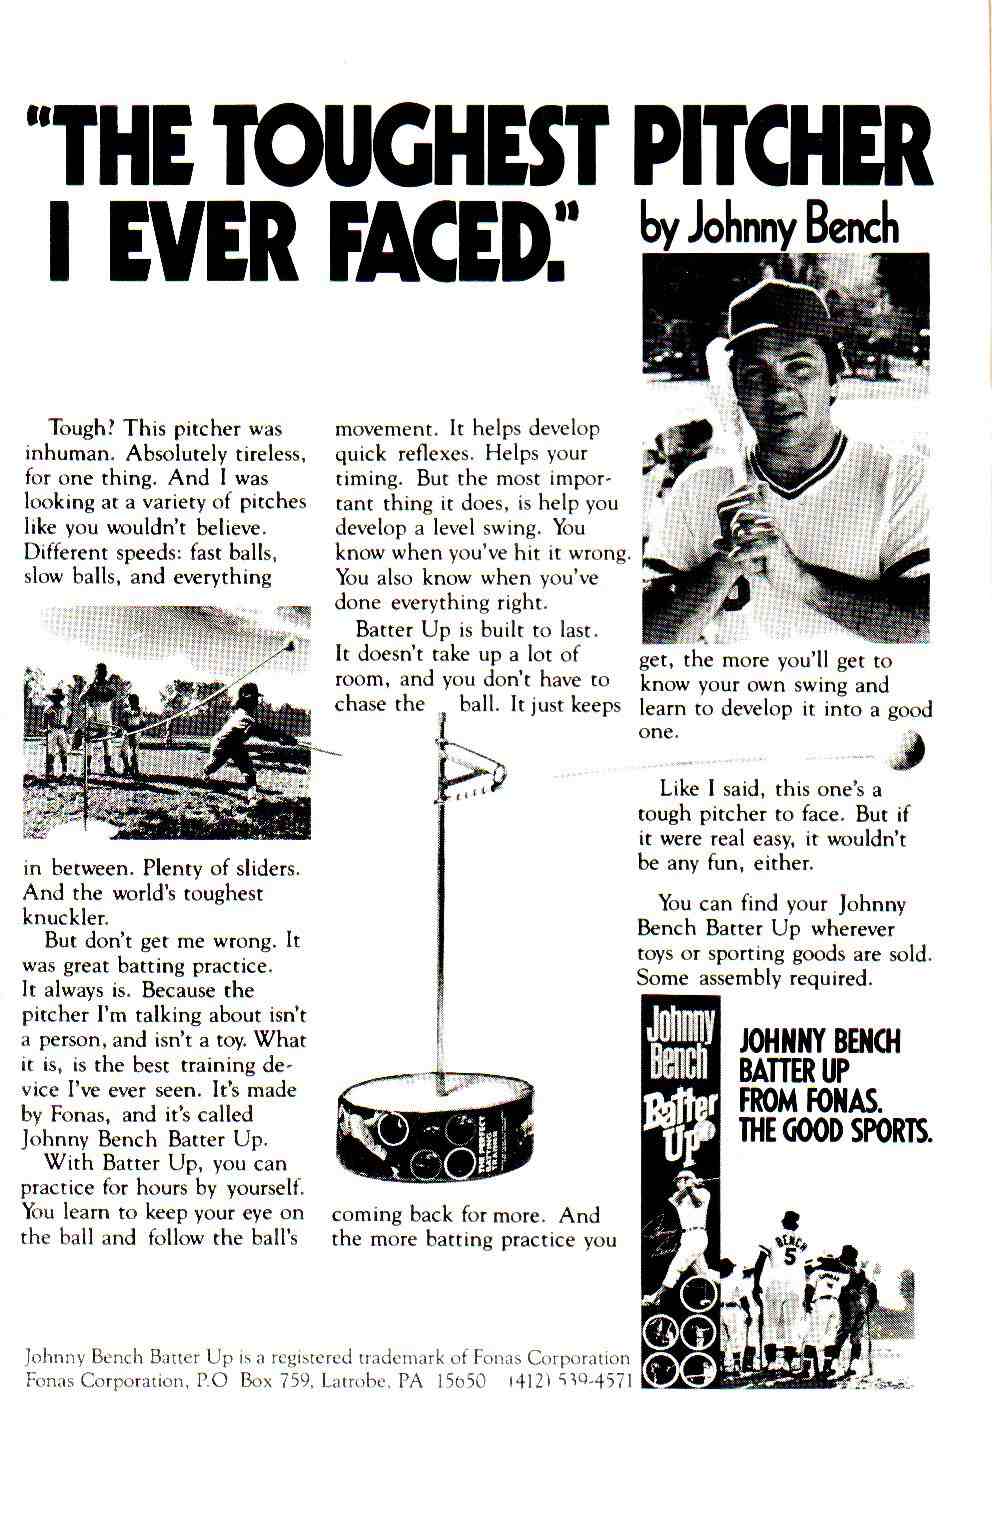 Johnny_Bench_Batter_Up_Comic_Book_Ad | Bionic Disco